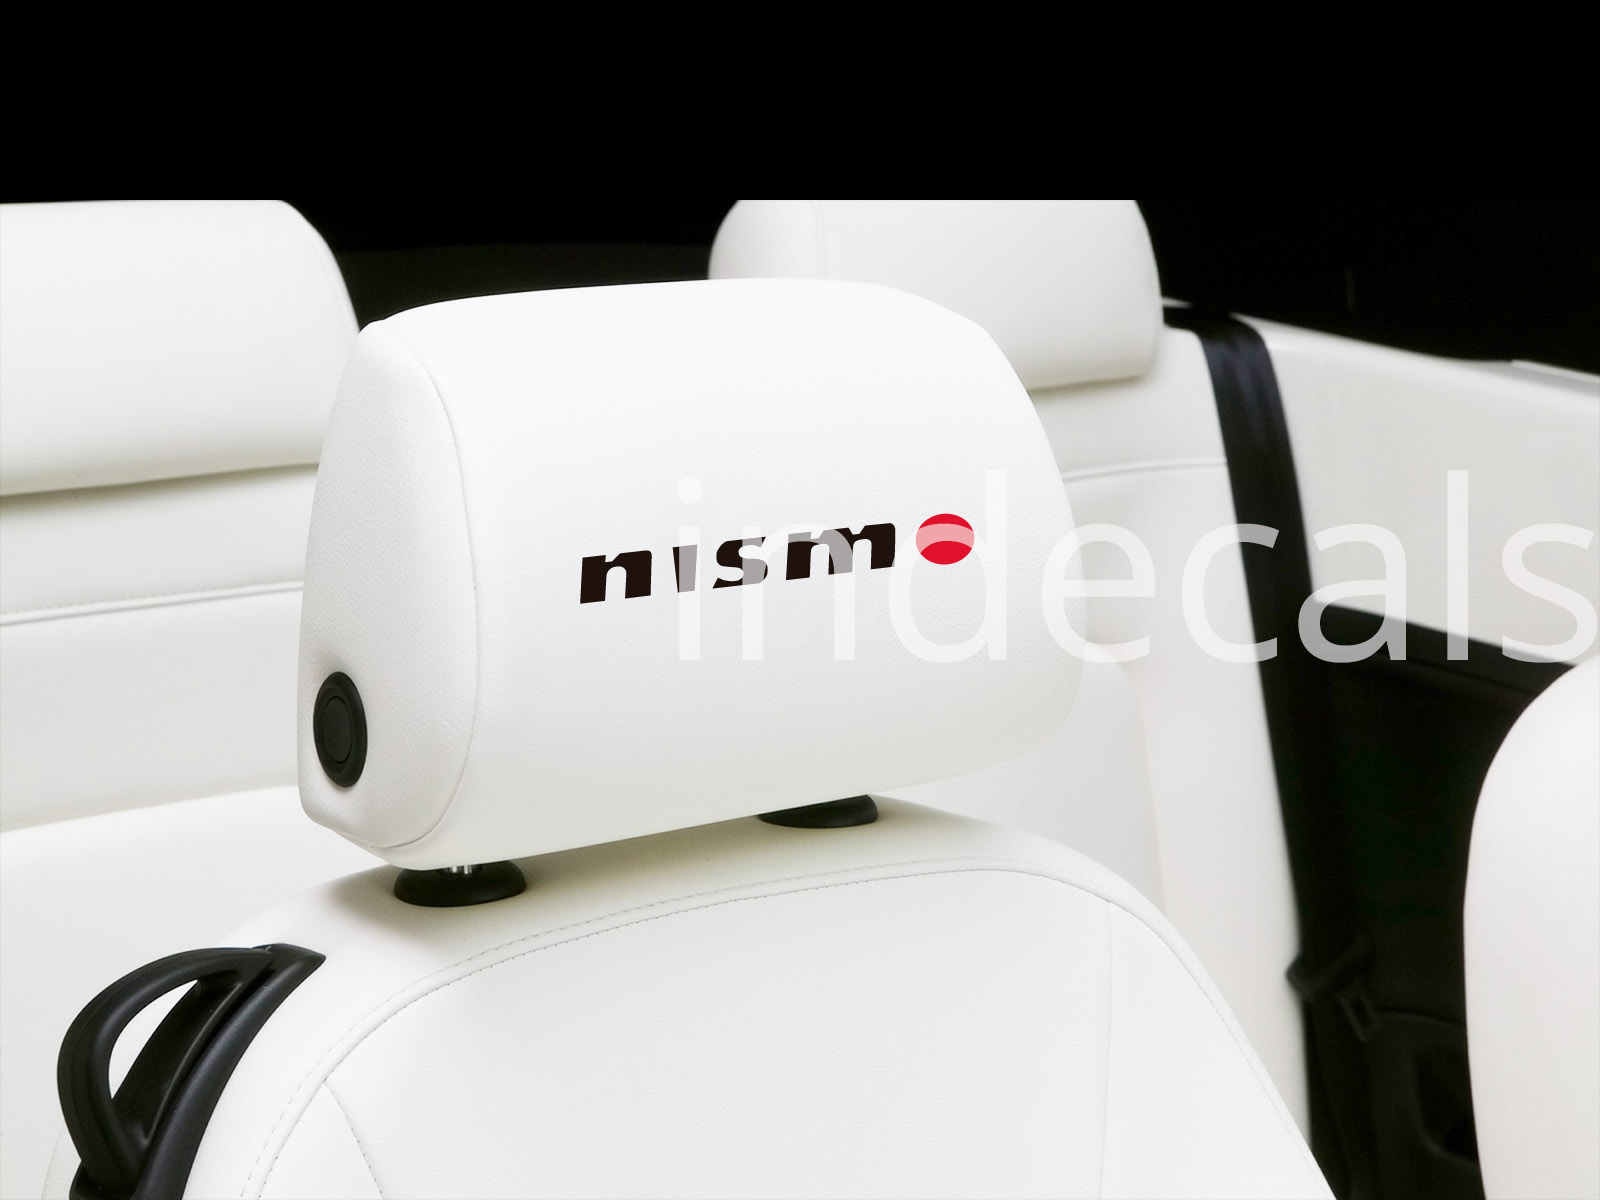 6 x Nismo Stickers for Headrests - Black